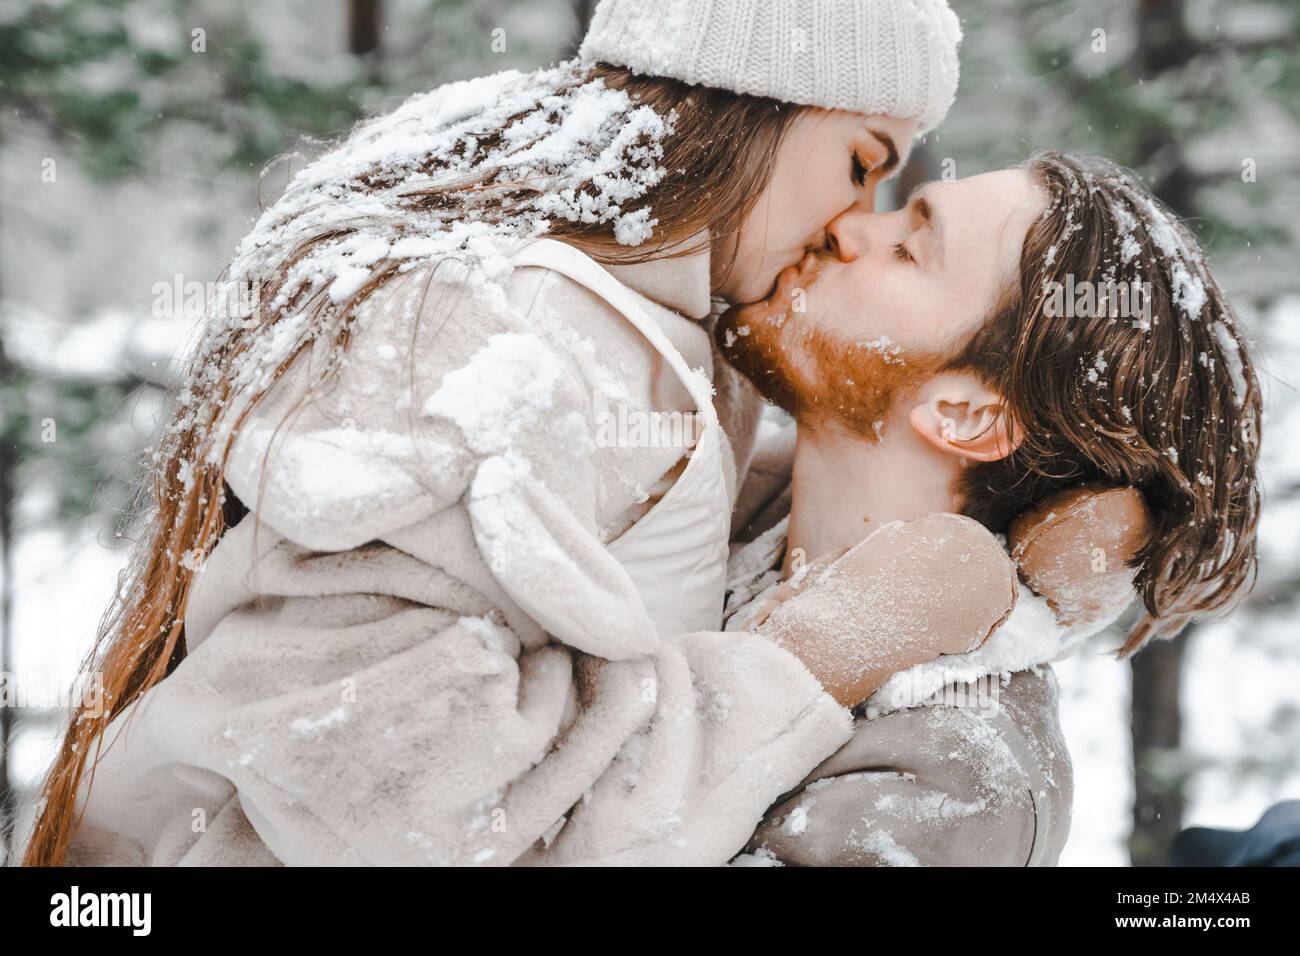 Romantic Snow Love Storyyoung Couple Guy Girl Playing Kissing In Snowy Winter Forest With Trees